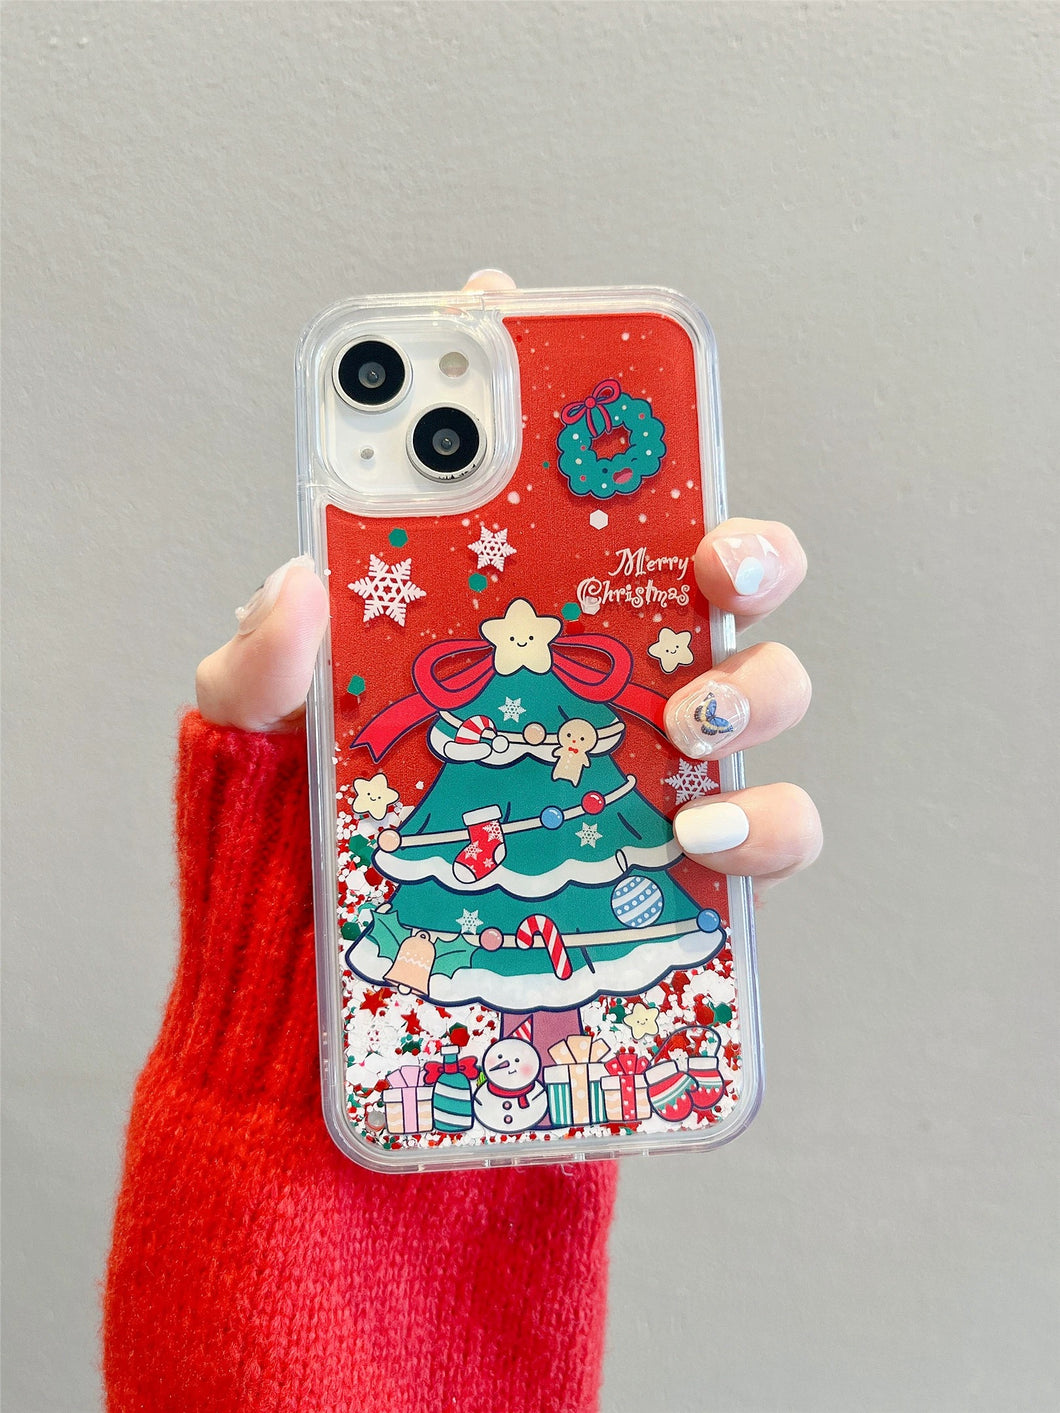 Falling Snow Christmas iPhone Case